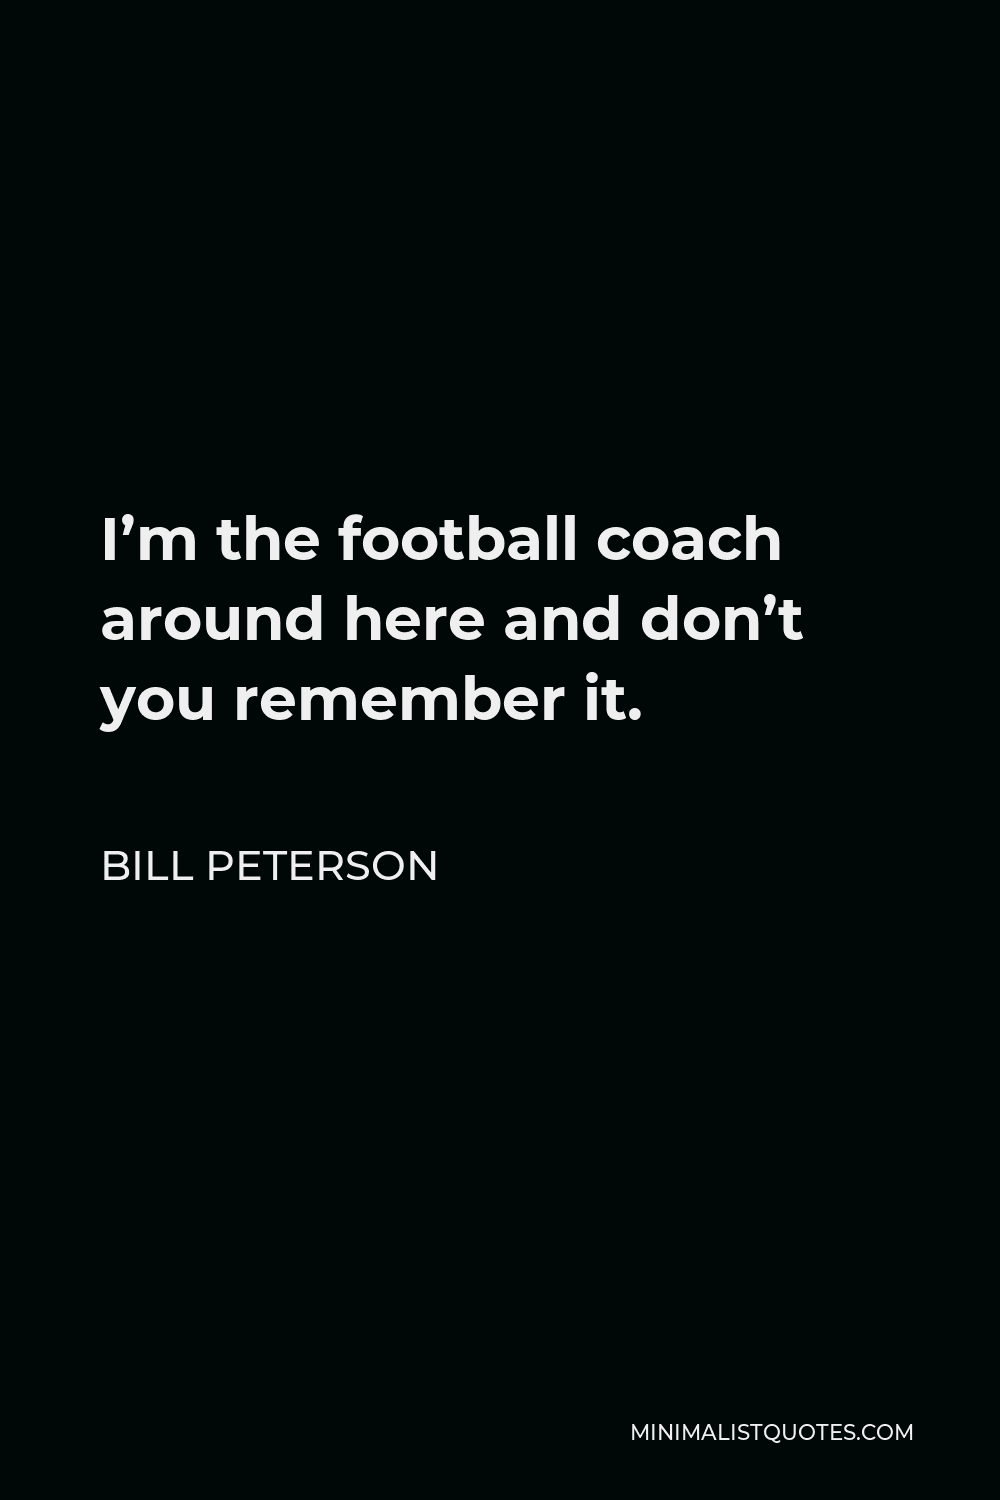 Bill Peterson Quote - I’m the football coach around here and don’t you remember it.